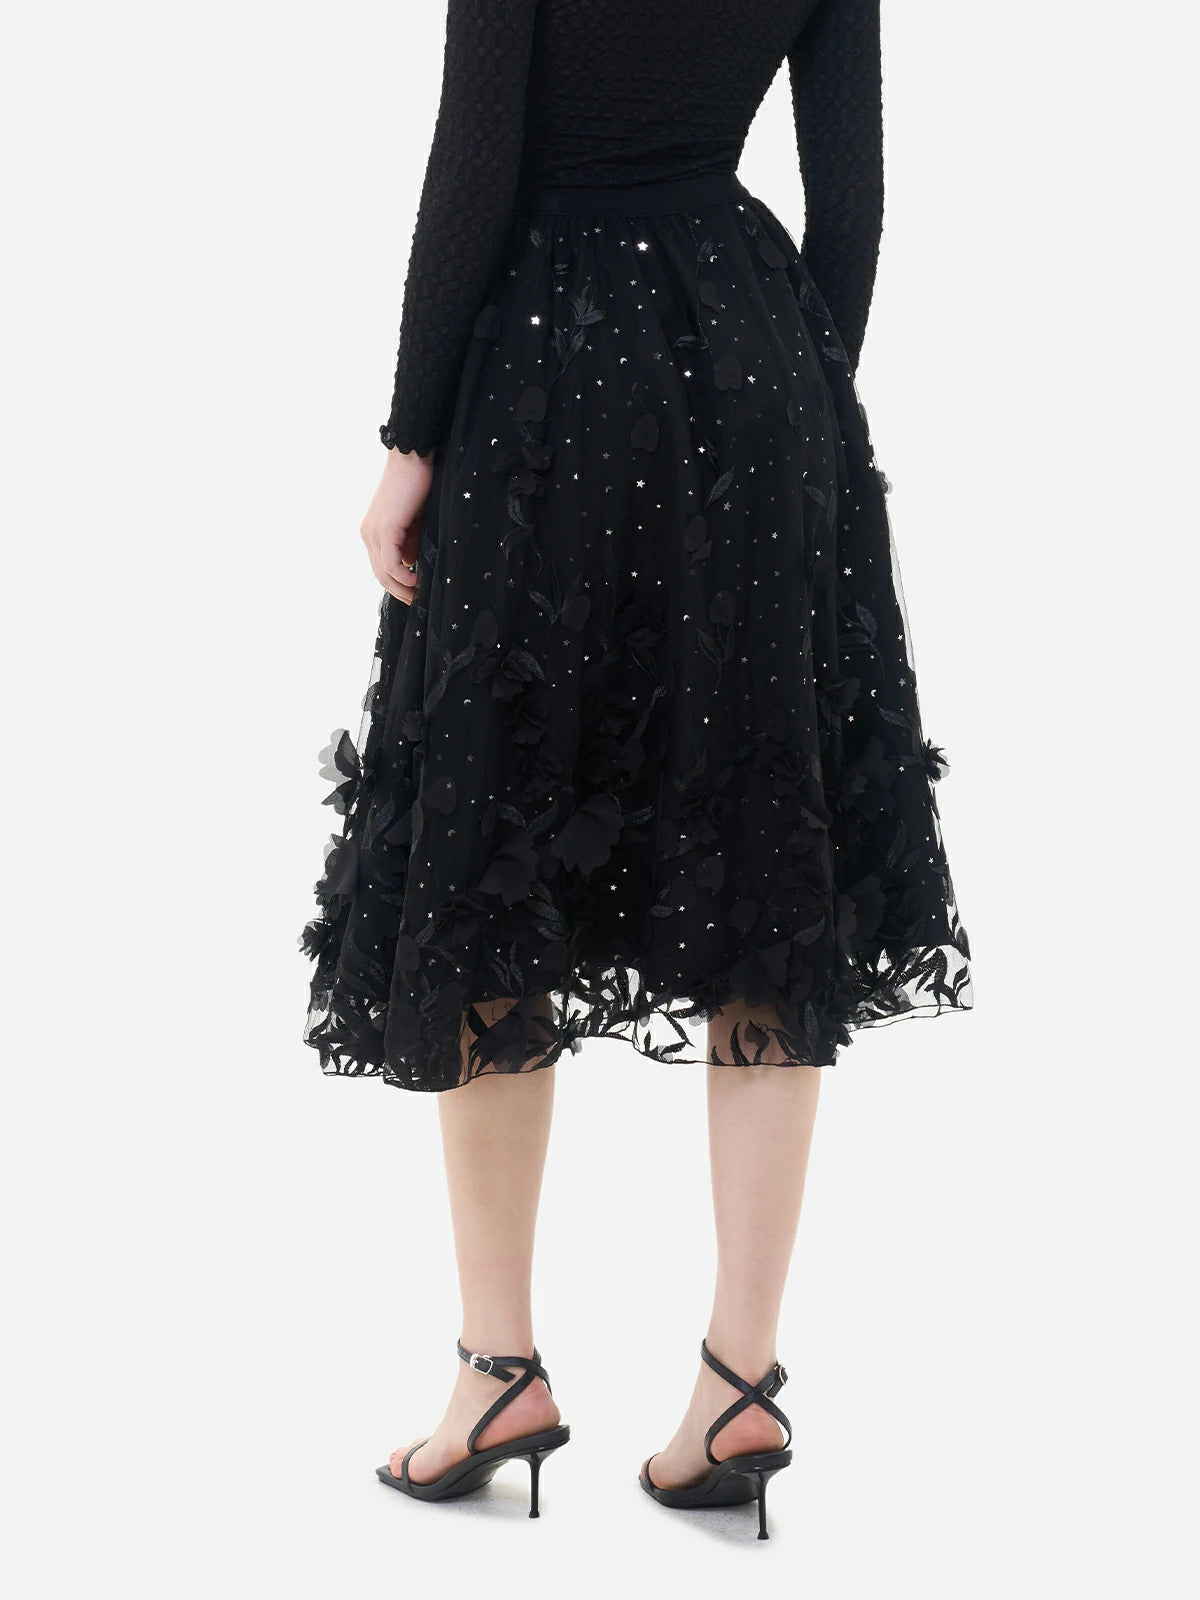 Exquisite craftsmanship is displayed in the embroidered details and appliqué flowers of this fashionable black double-layered skirt.